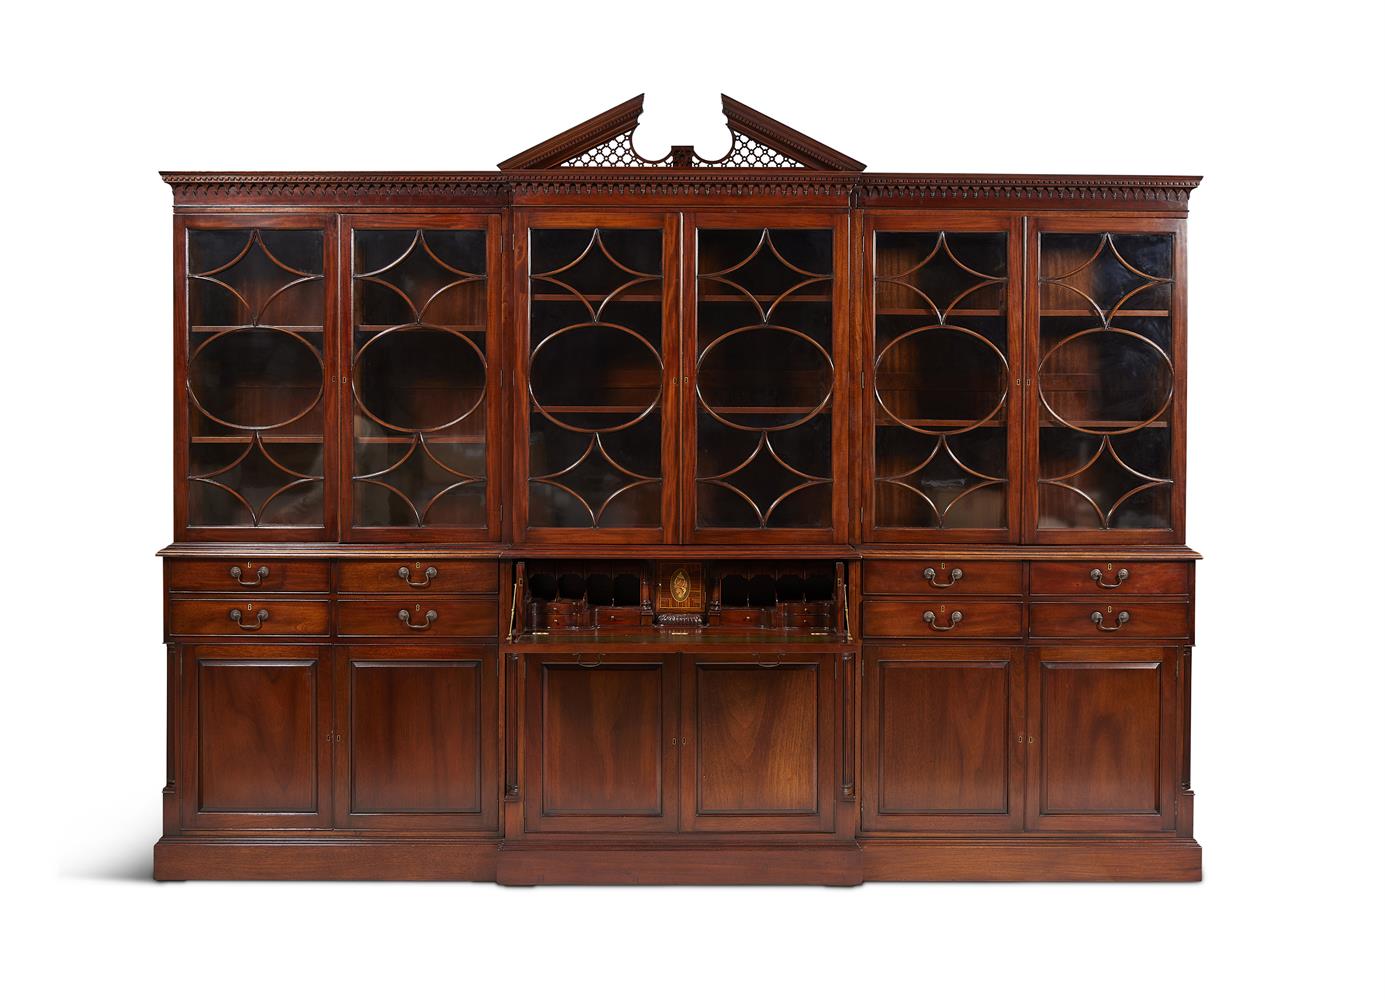 A MAHOGANY BREAKFRONT LIBRARY BOOKCASE IN GEORGE III STYLE